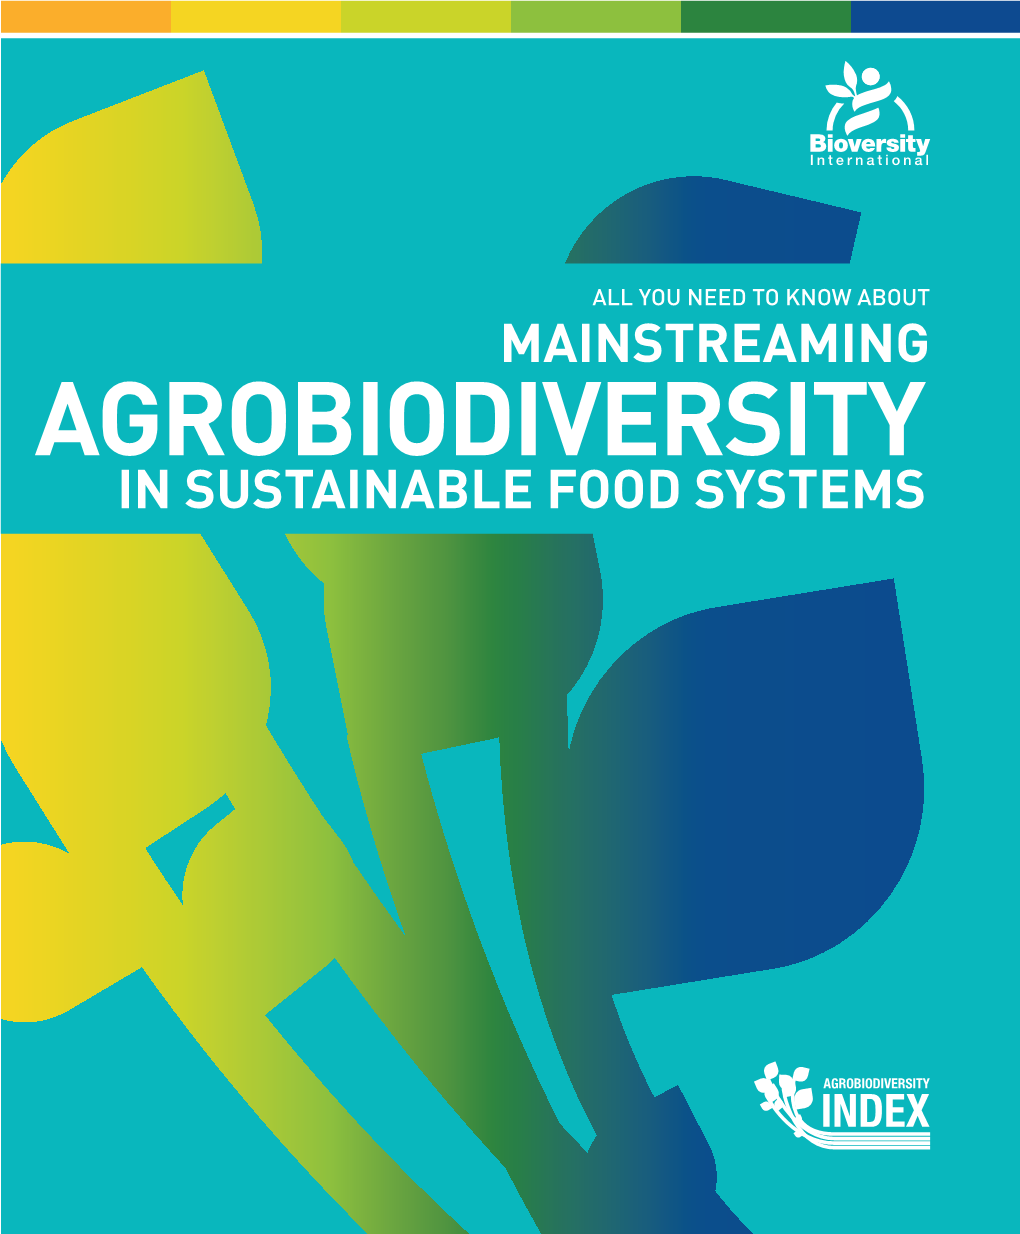 AGROBIODIVERSITY in SUSTAINABLE FOOD SYSTEMS What Is Agricultural Biodiversity?